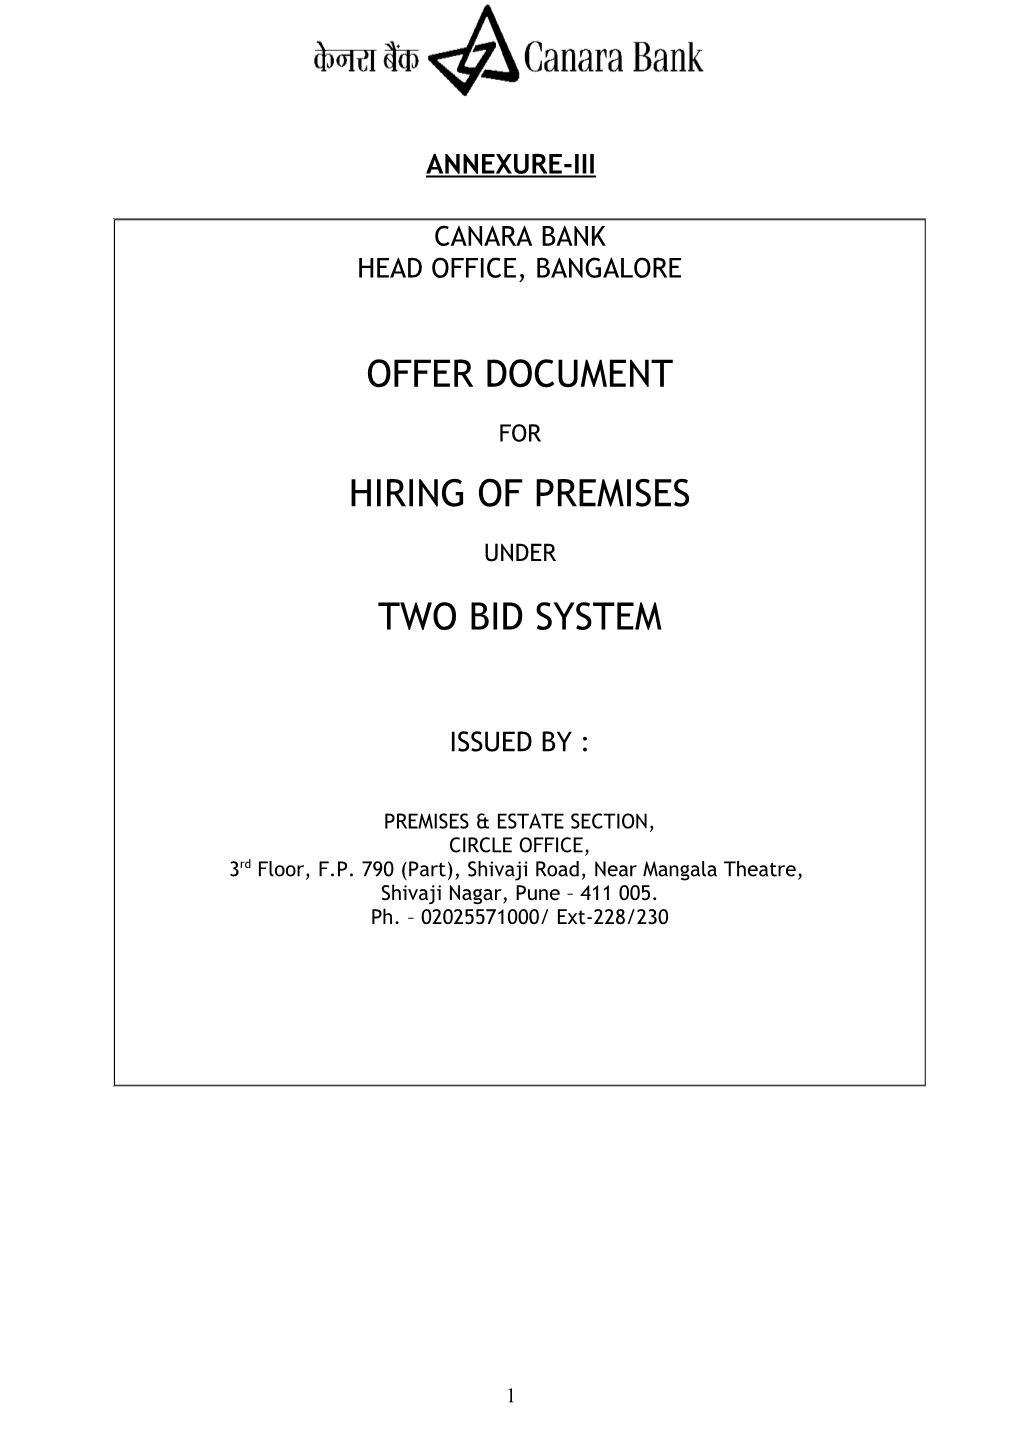 The Offer Document Consists of the Following s1